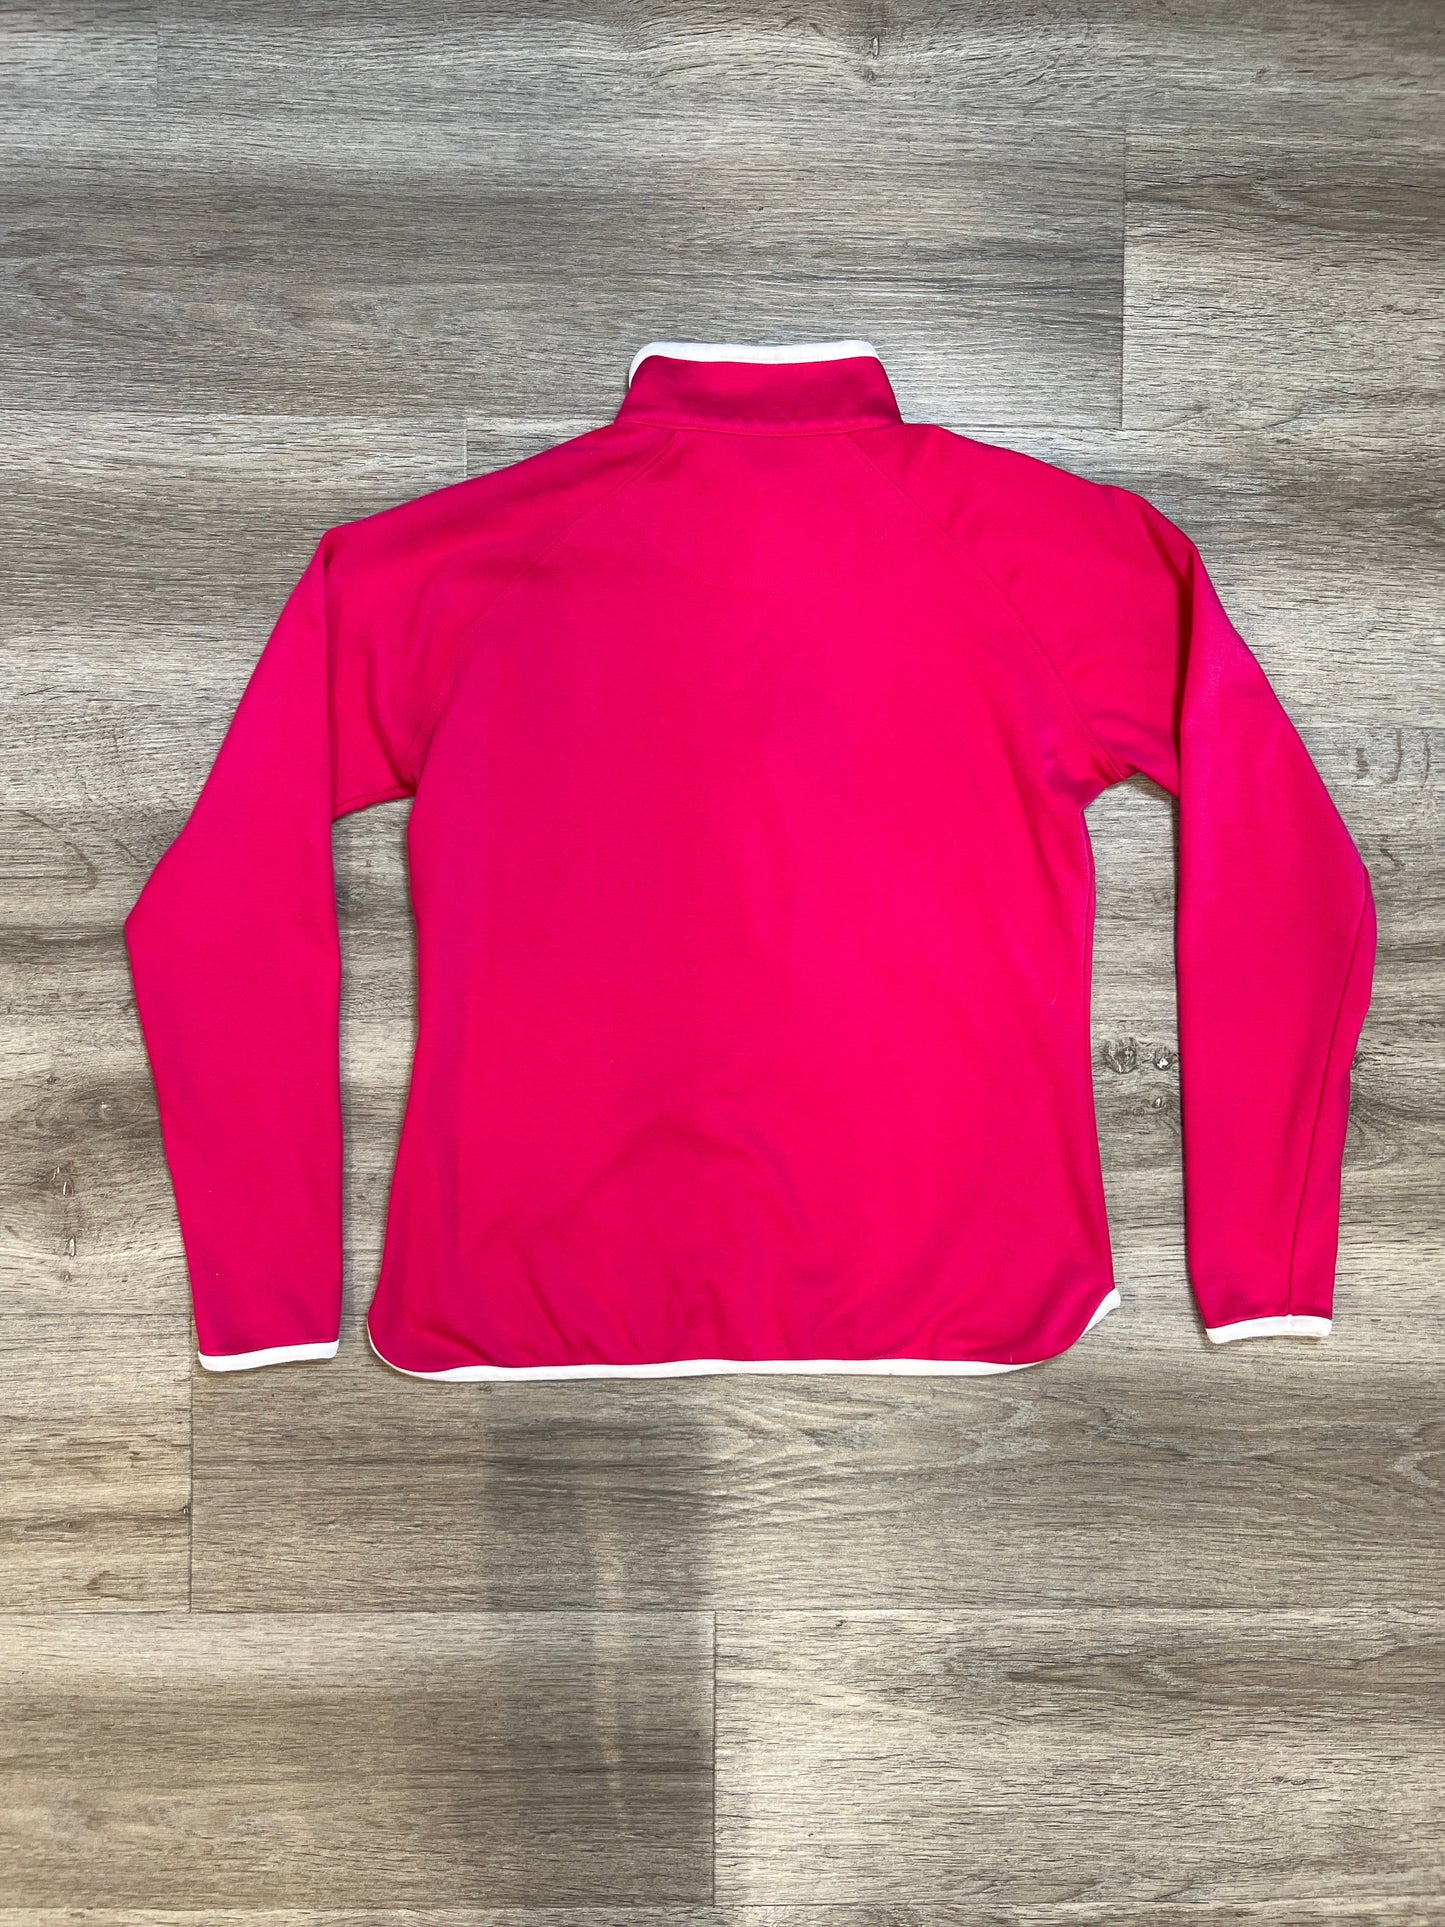 Athletic Top Long Sleeve Collar By Peter Millar Size: S